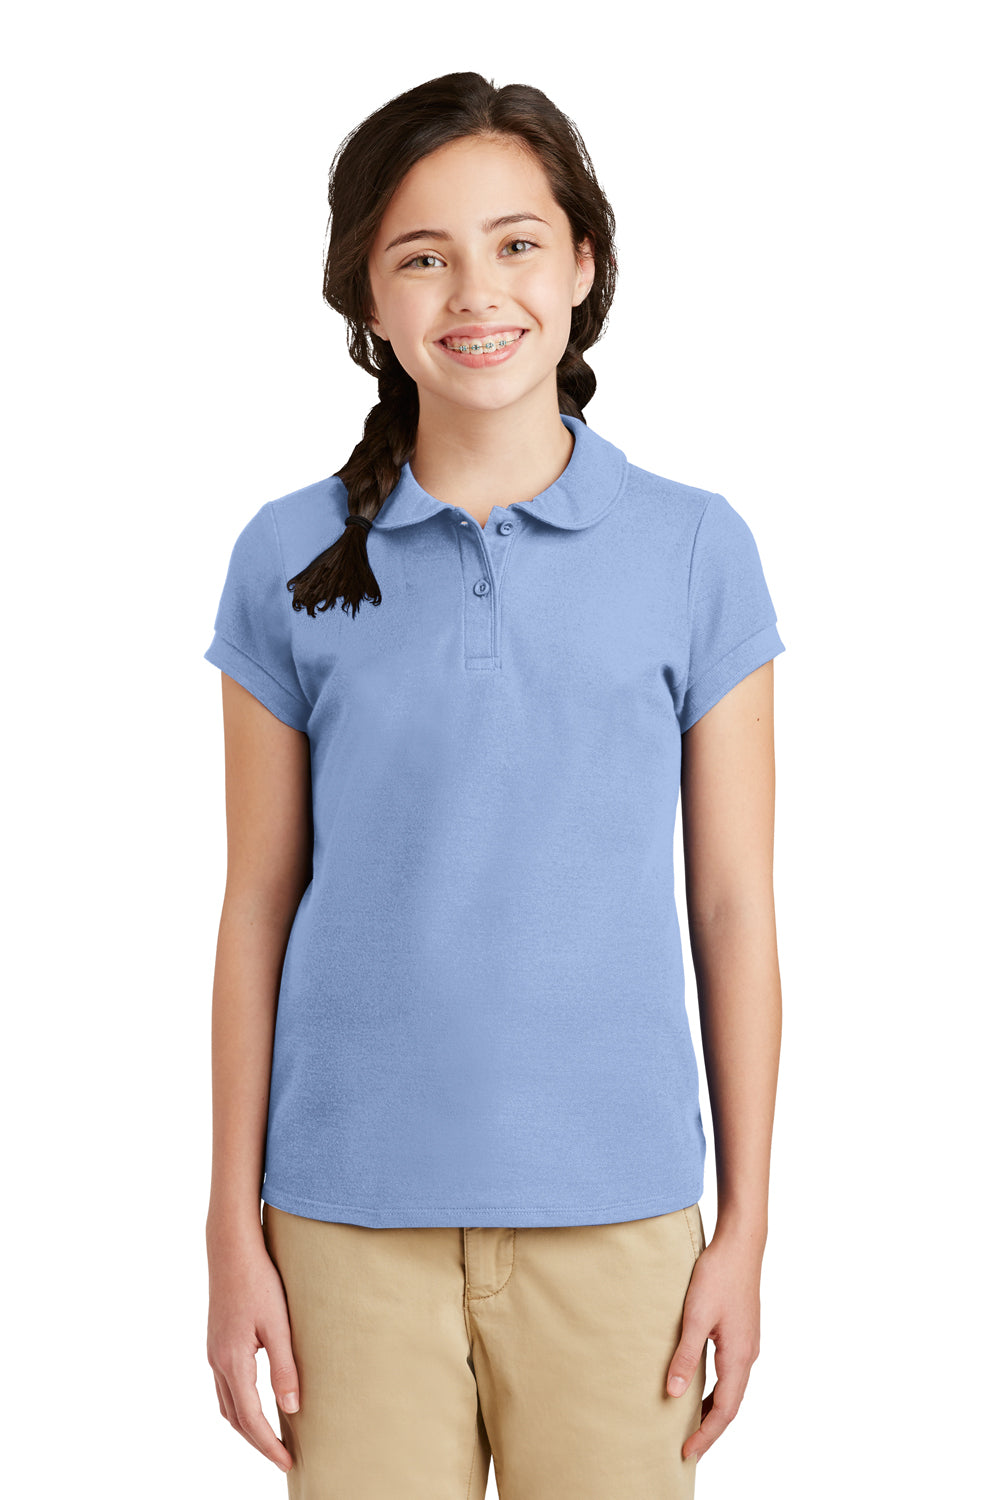 Port Authority YG503 Youth Silk Touch Wrinkle Resistant Short Sleeve Polo Shirt Light Blue Front